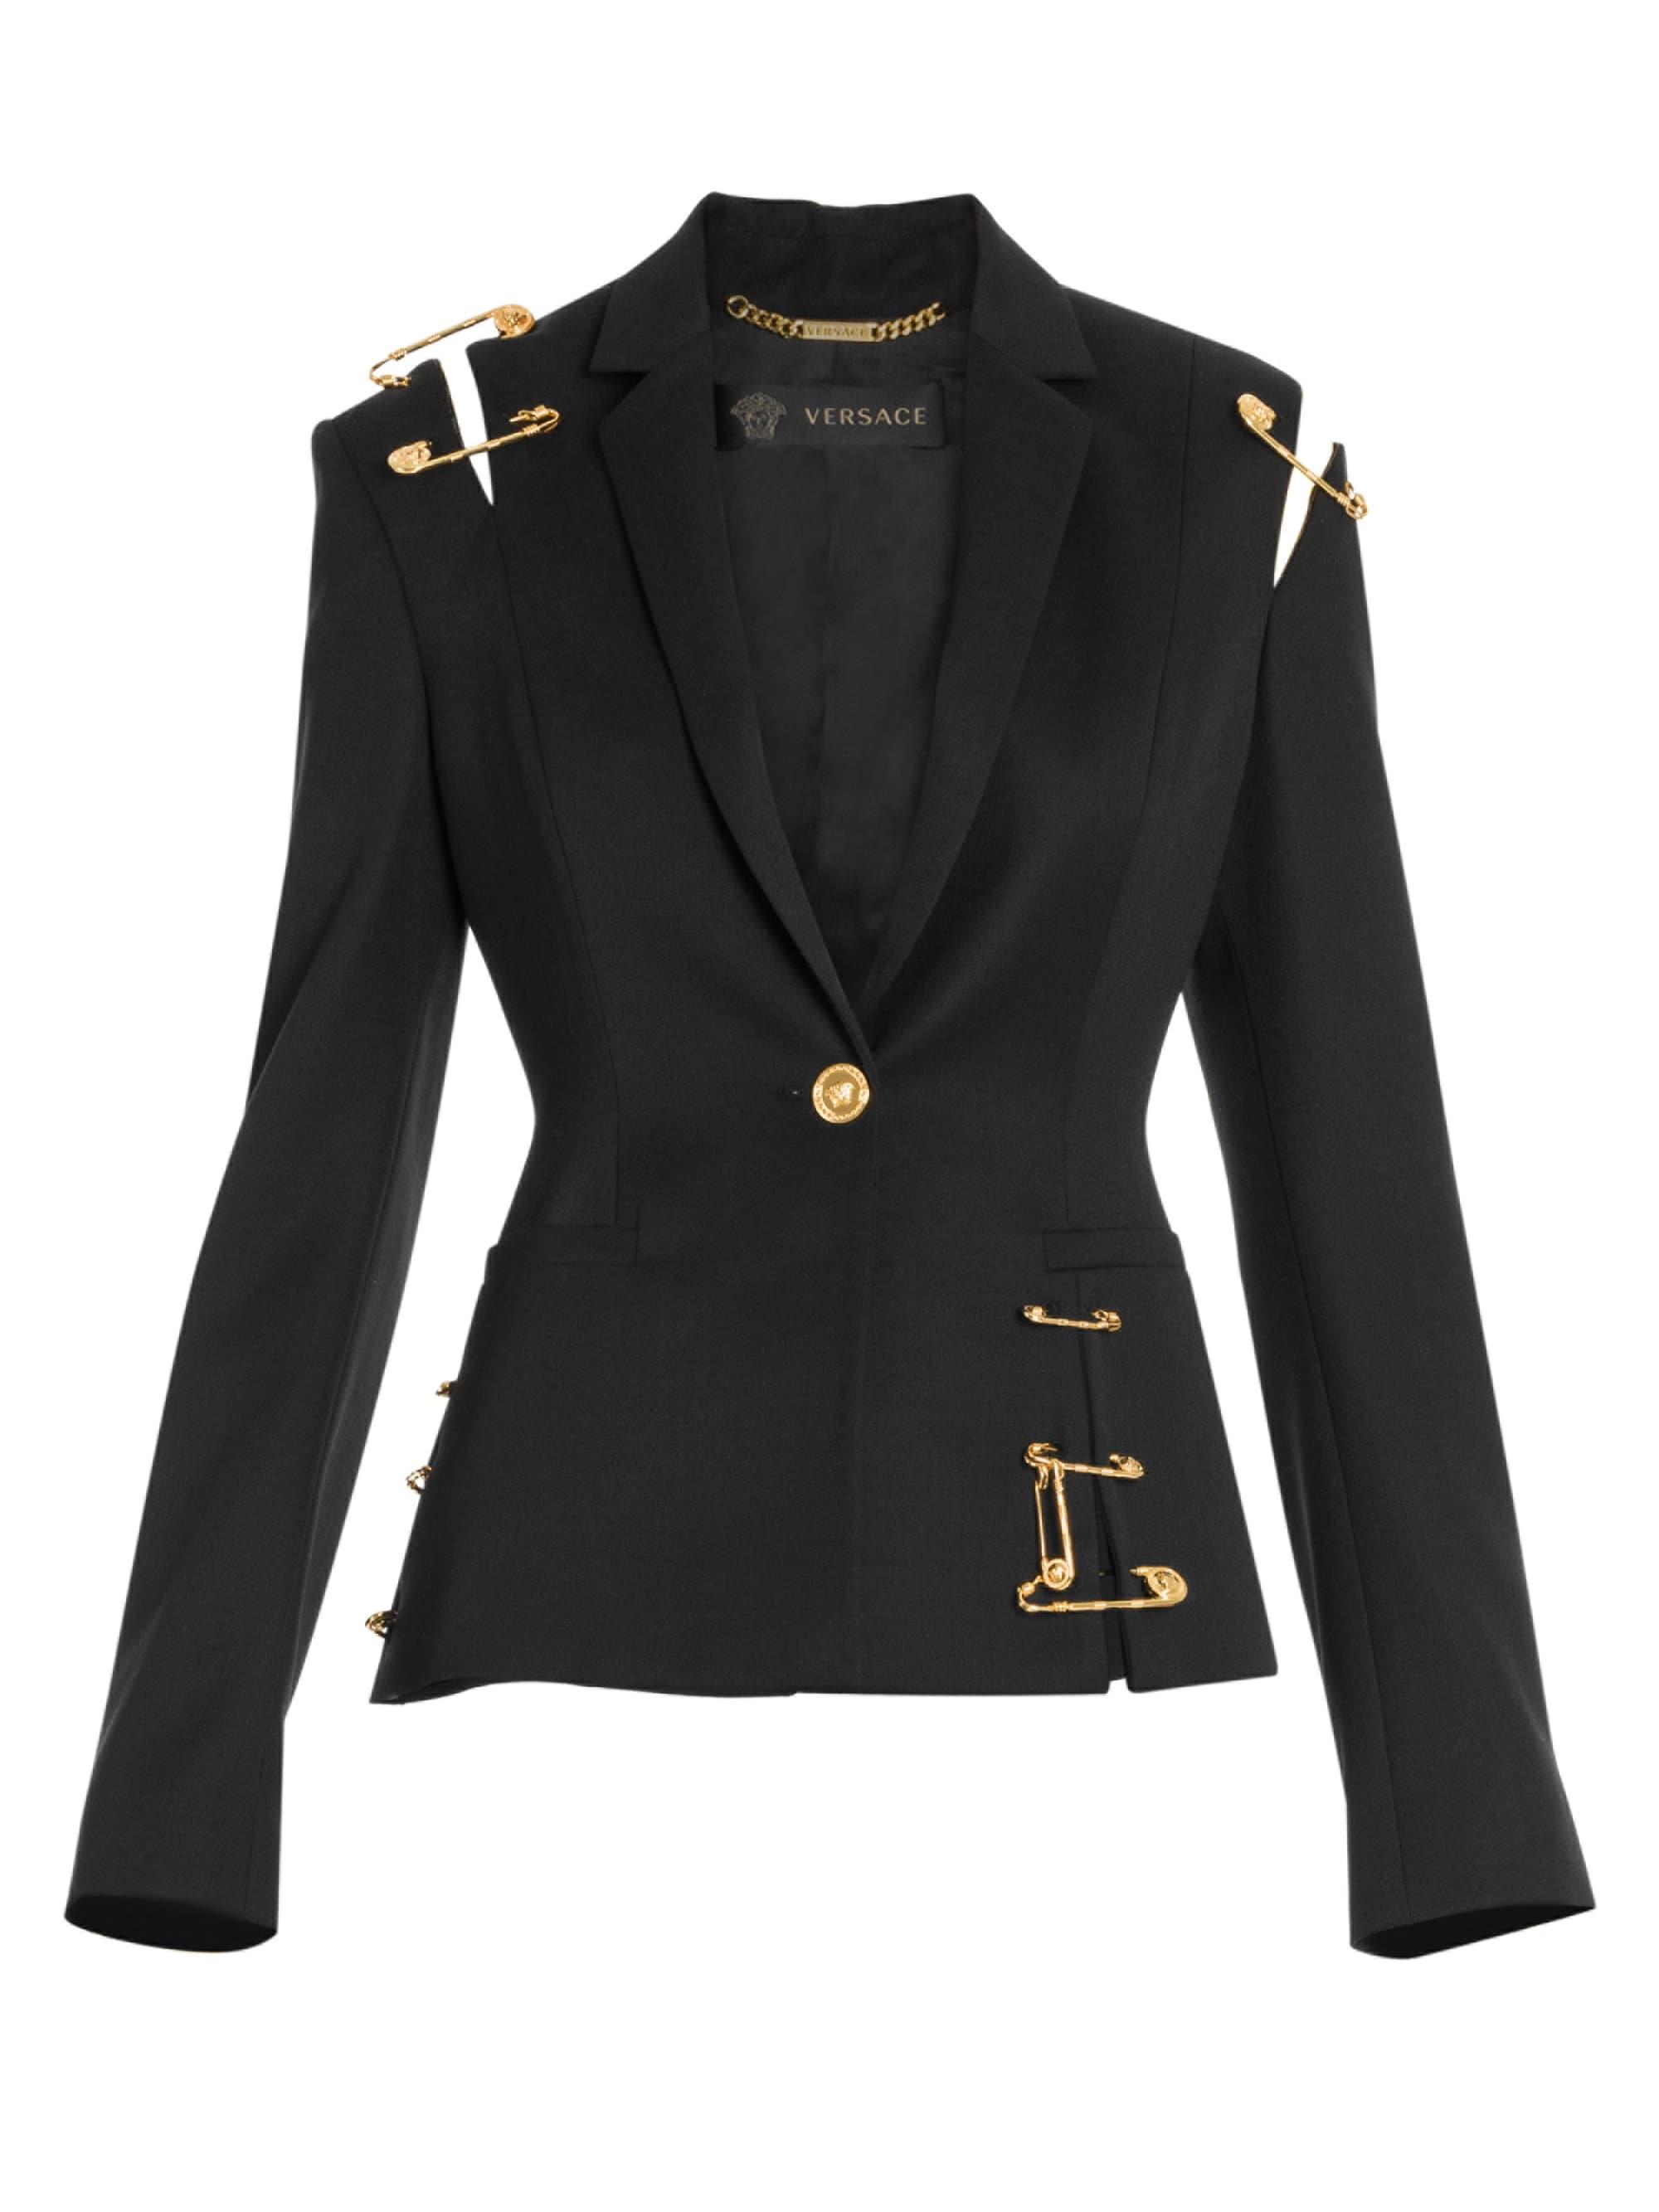 Versace Safety Pin Cutout Wool Jacket in Black - Save 5% - Lyst